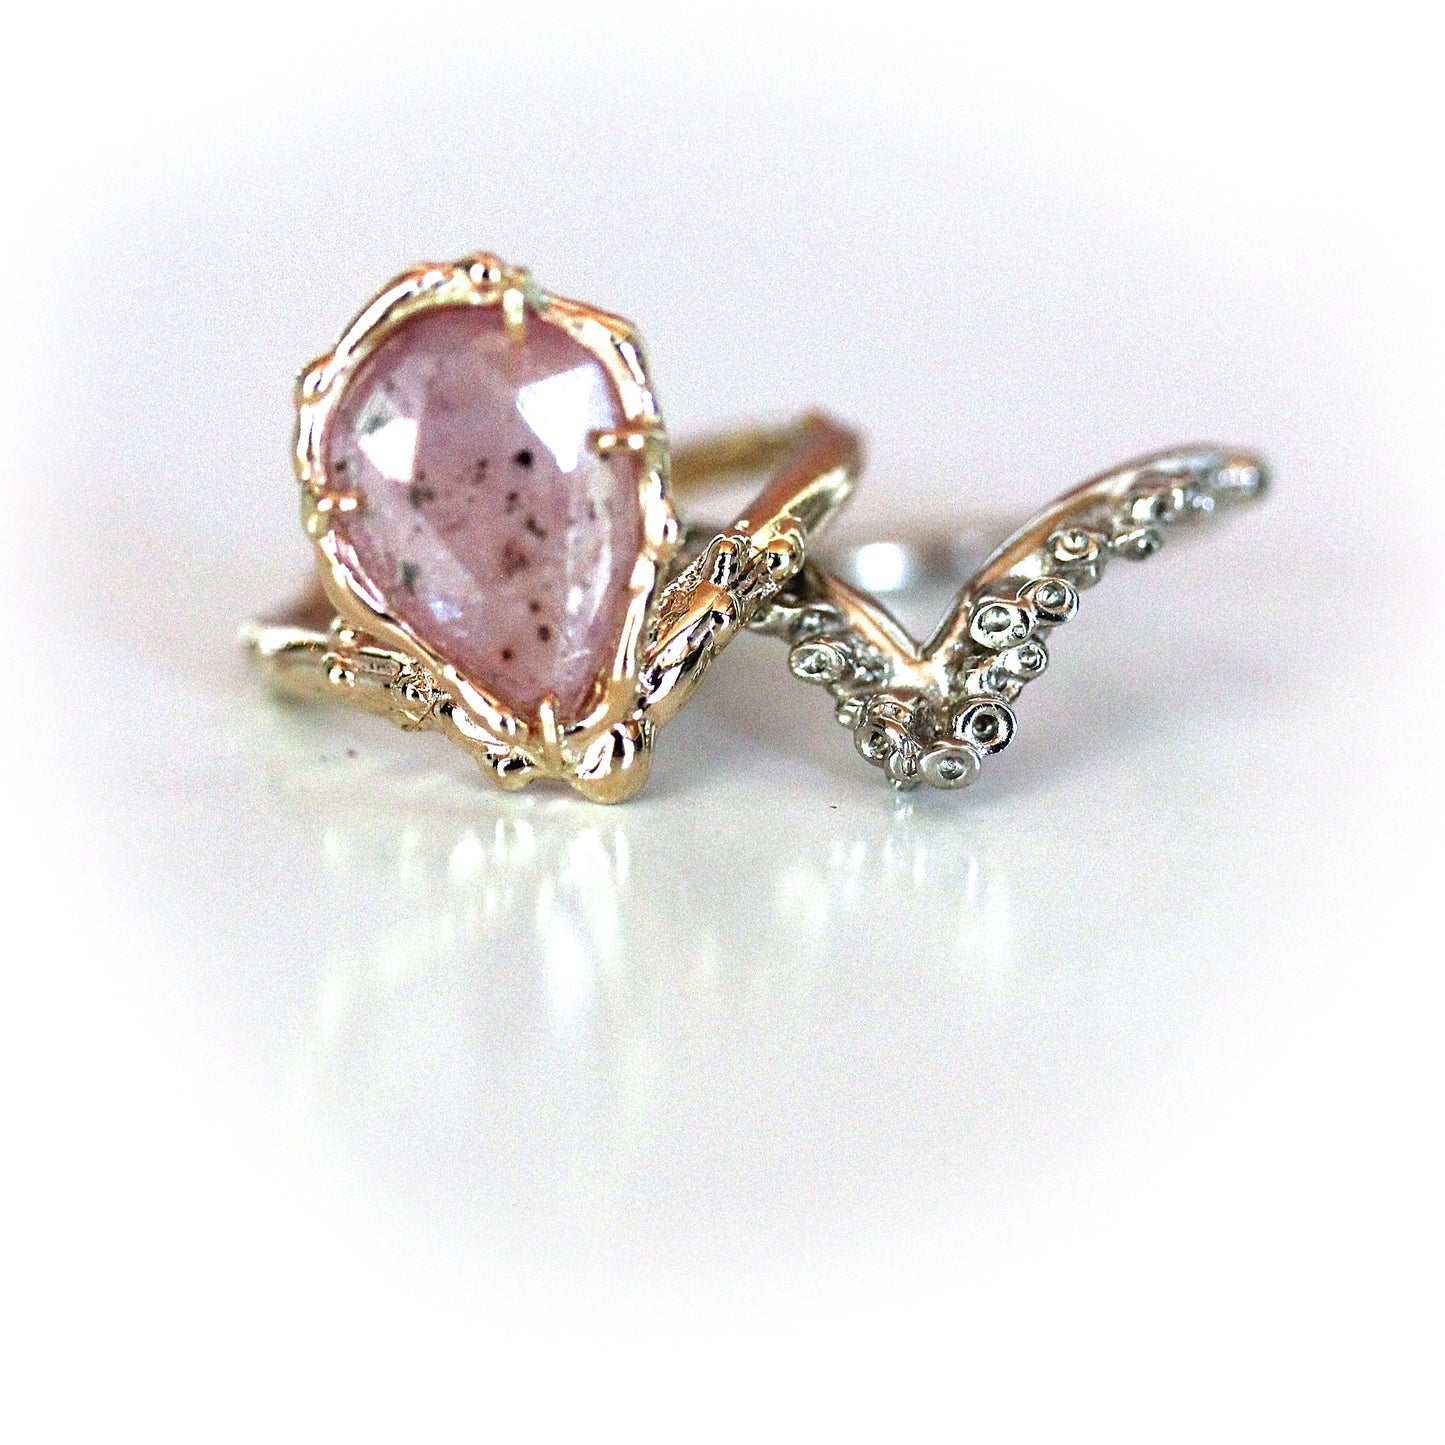 Pale pink sapphire engagement ring and ocean inspired, nautical or coral reef inspired band